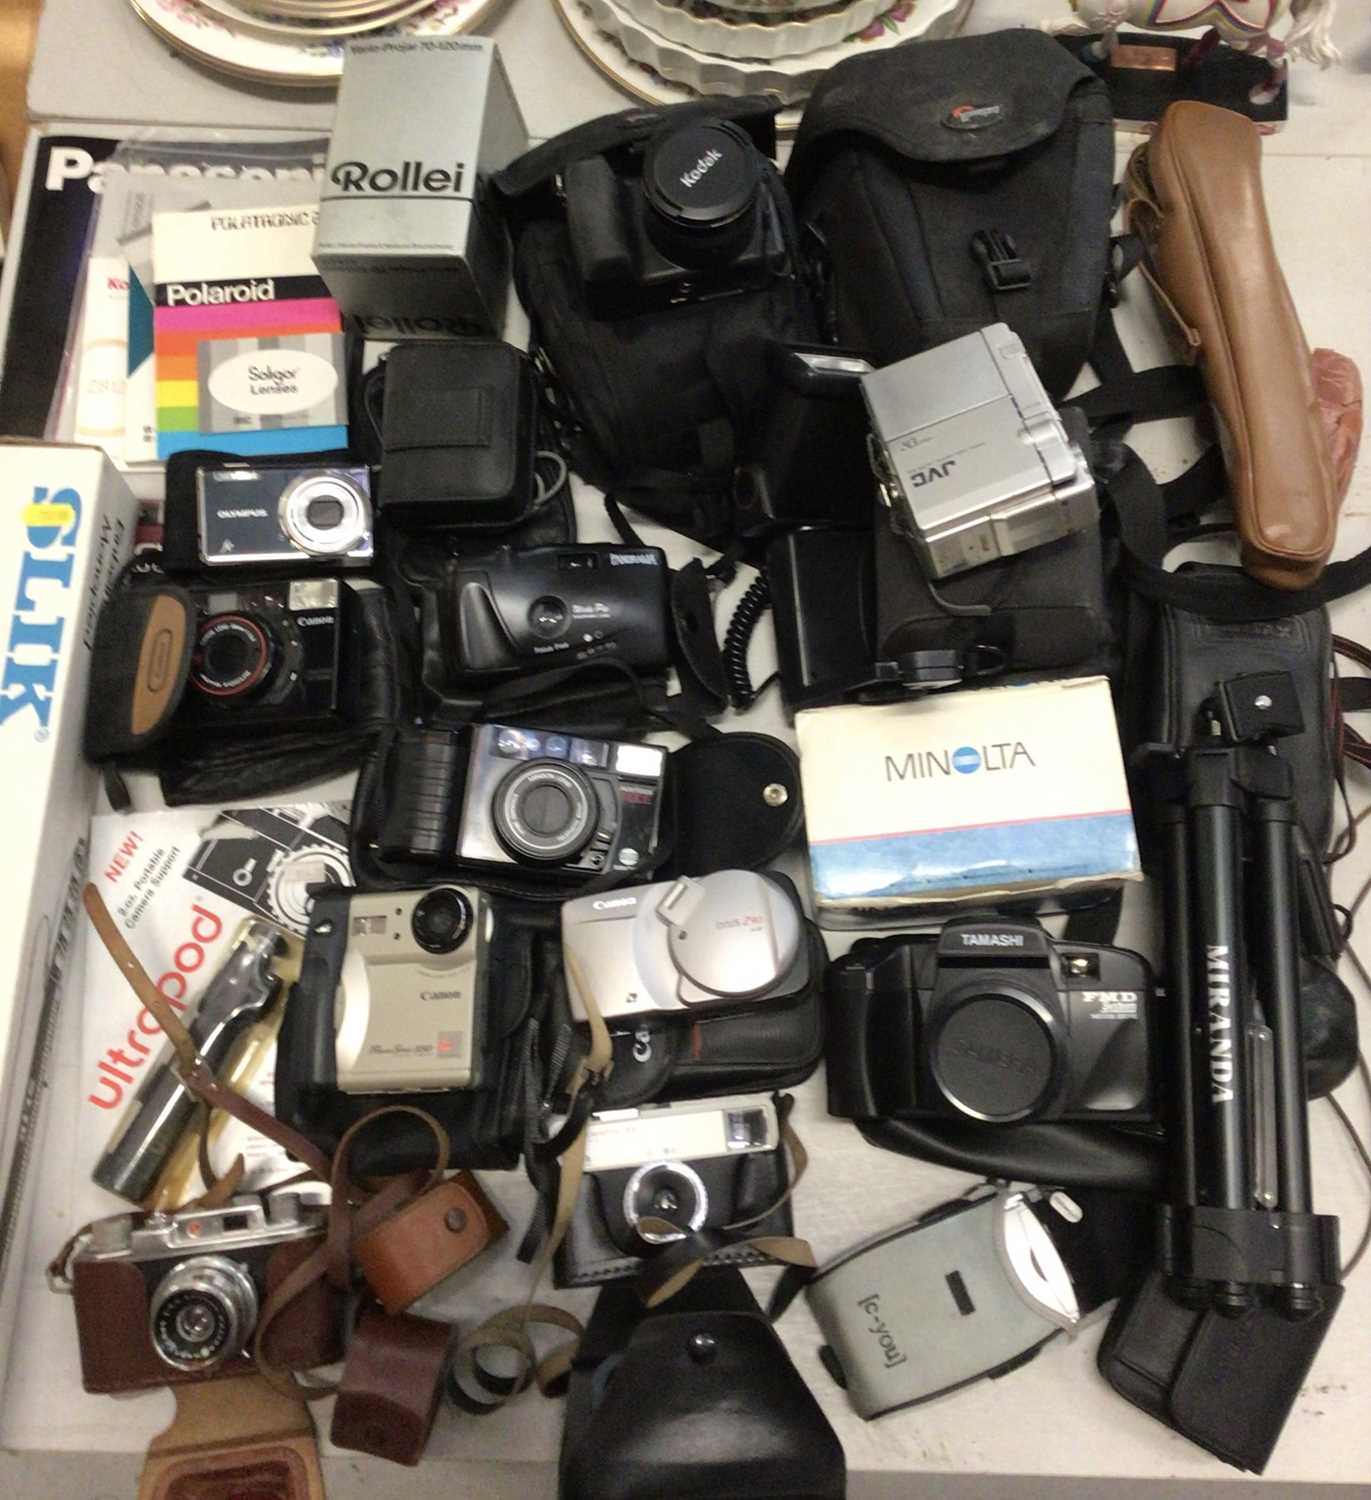 Group of digital and other cameras including Kodak, Minolta, Olympus etc tripods and accessories